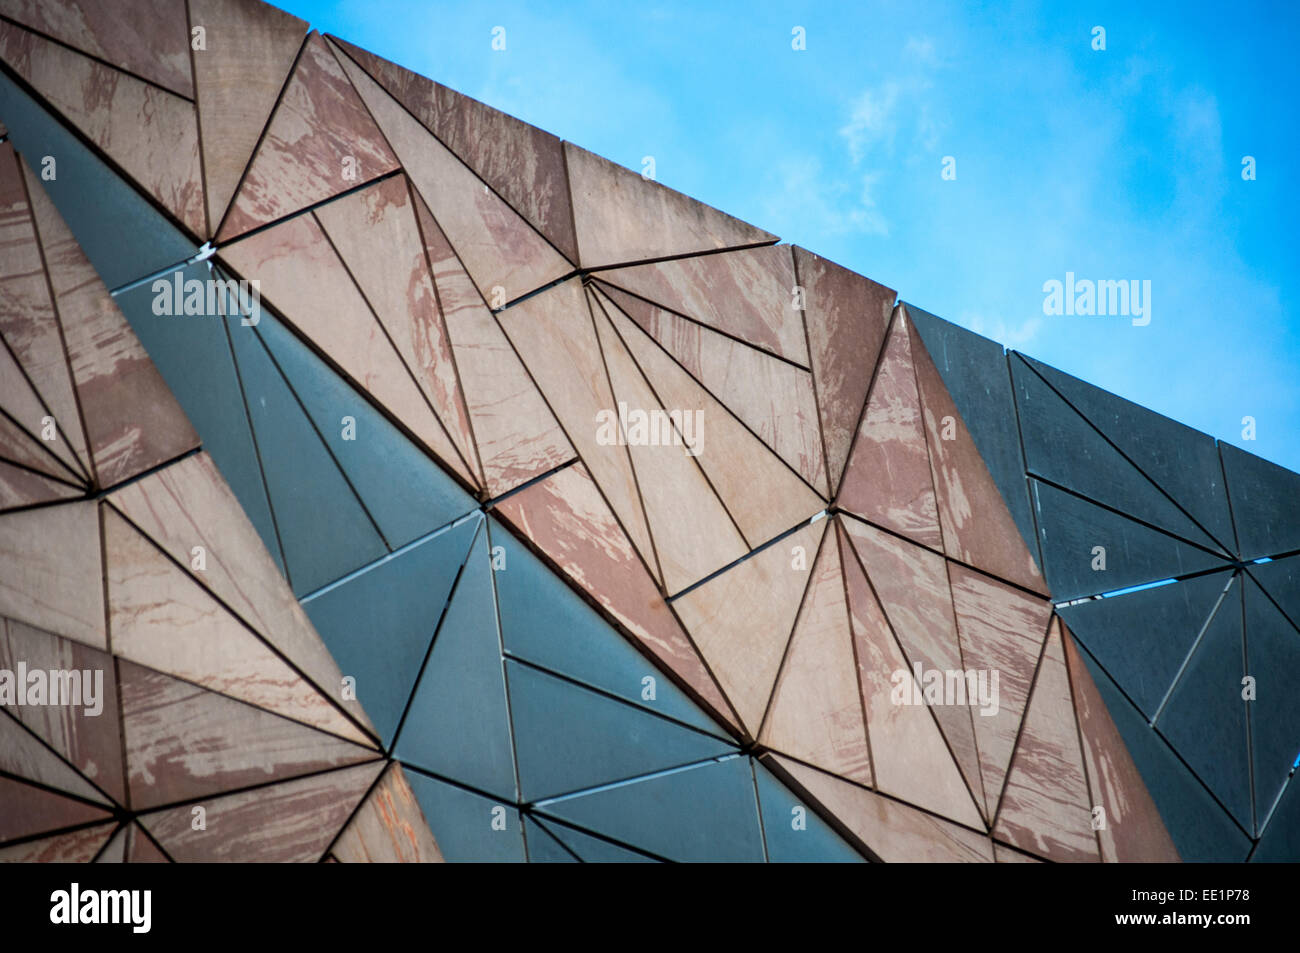 Close up of a building near the Federation Square in Melbourne, Australia showing finer architectural details Stock Photo